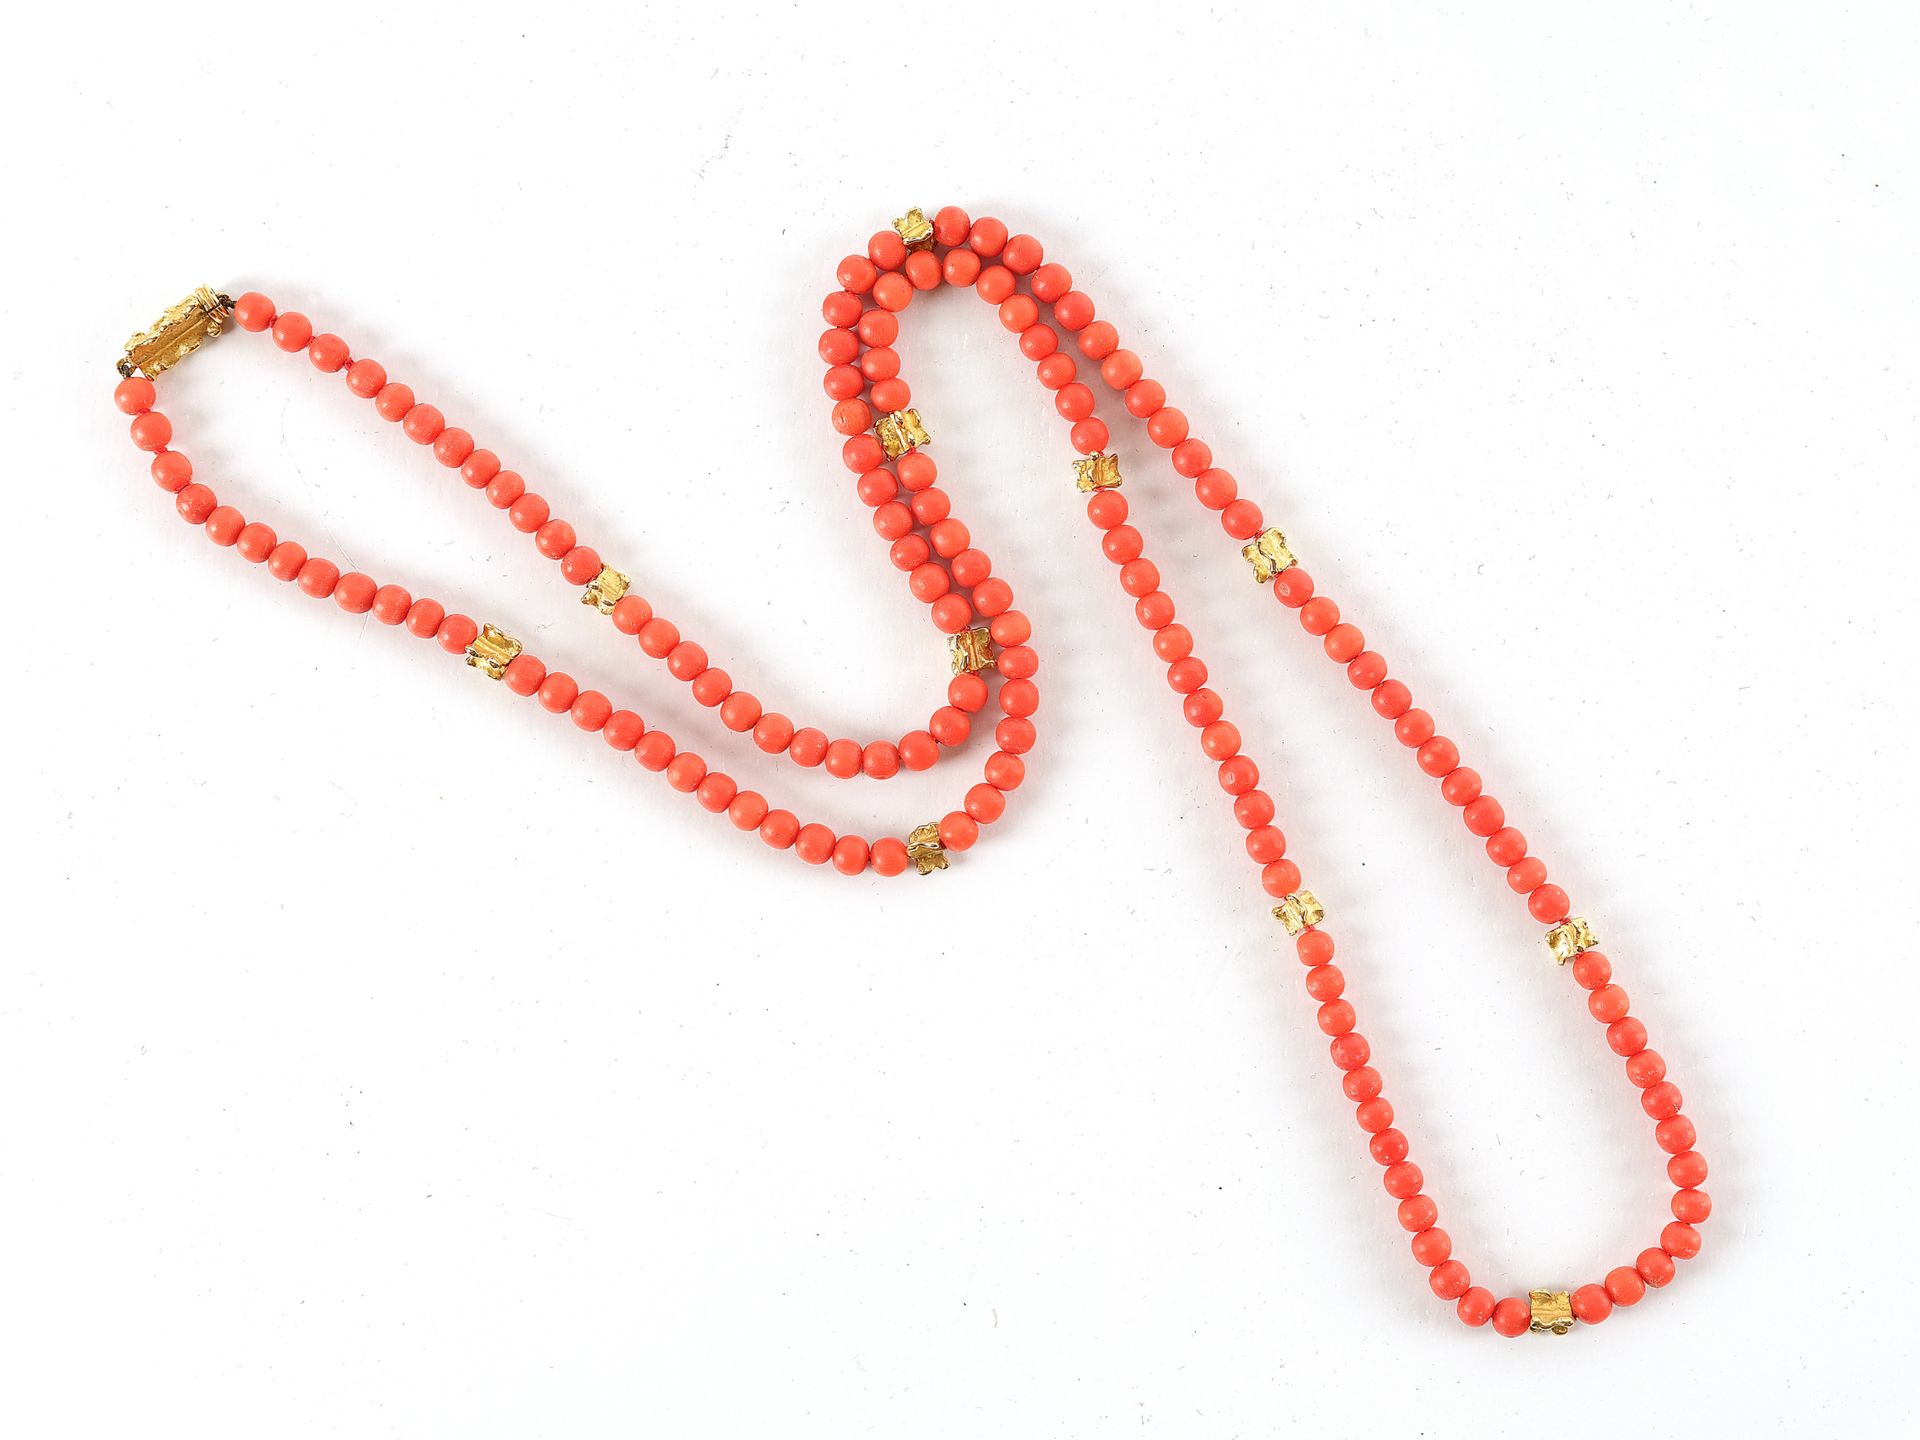 Coral necklace, 
Mid 20th century, 
Coral adorned with gold beads